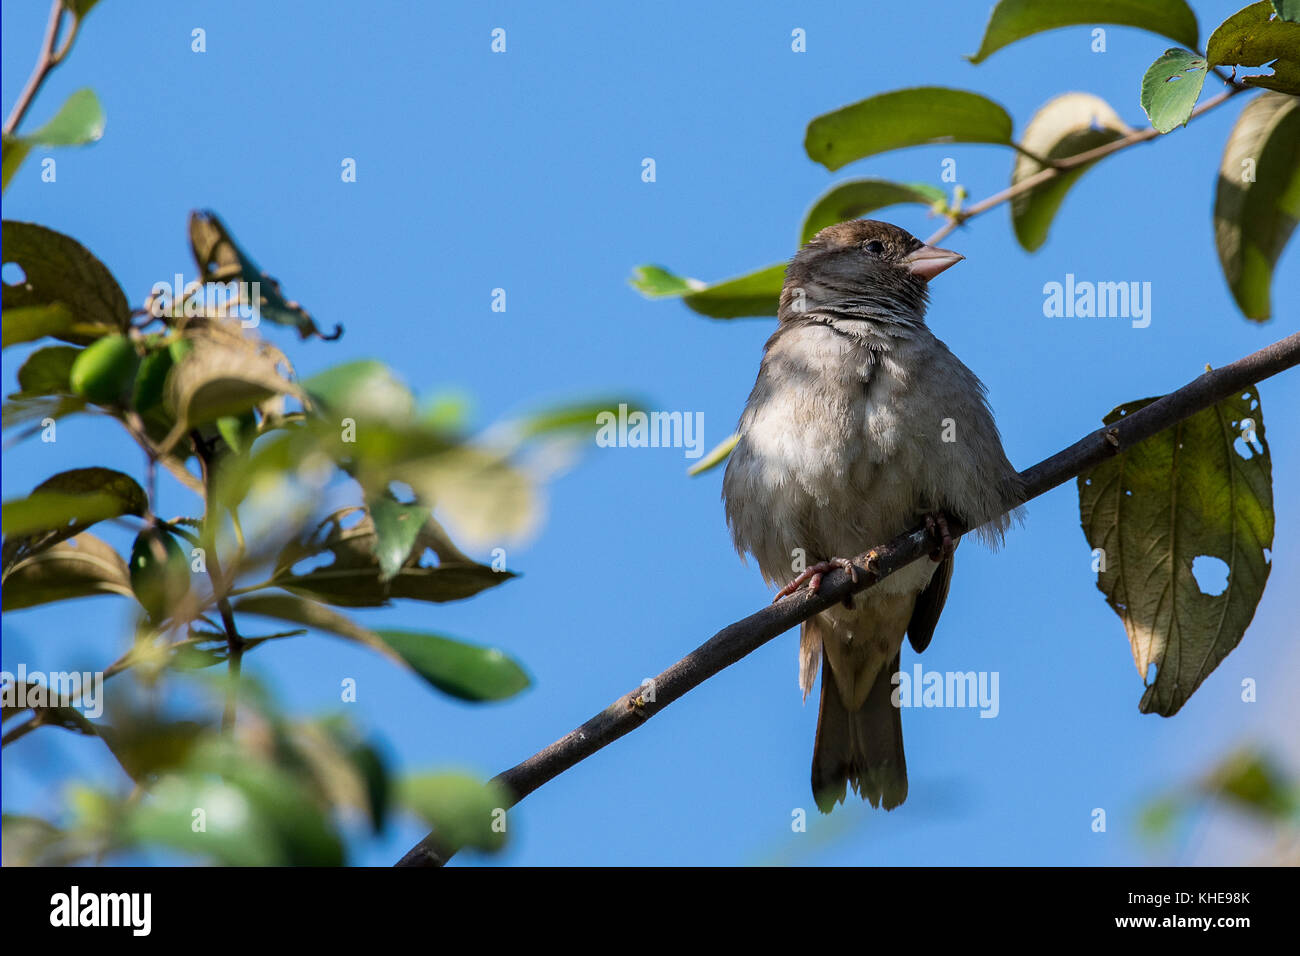 Female Sind Sparrow Sitting on Branch Stock Photo